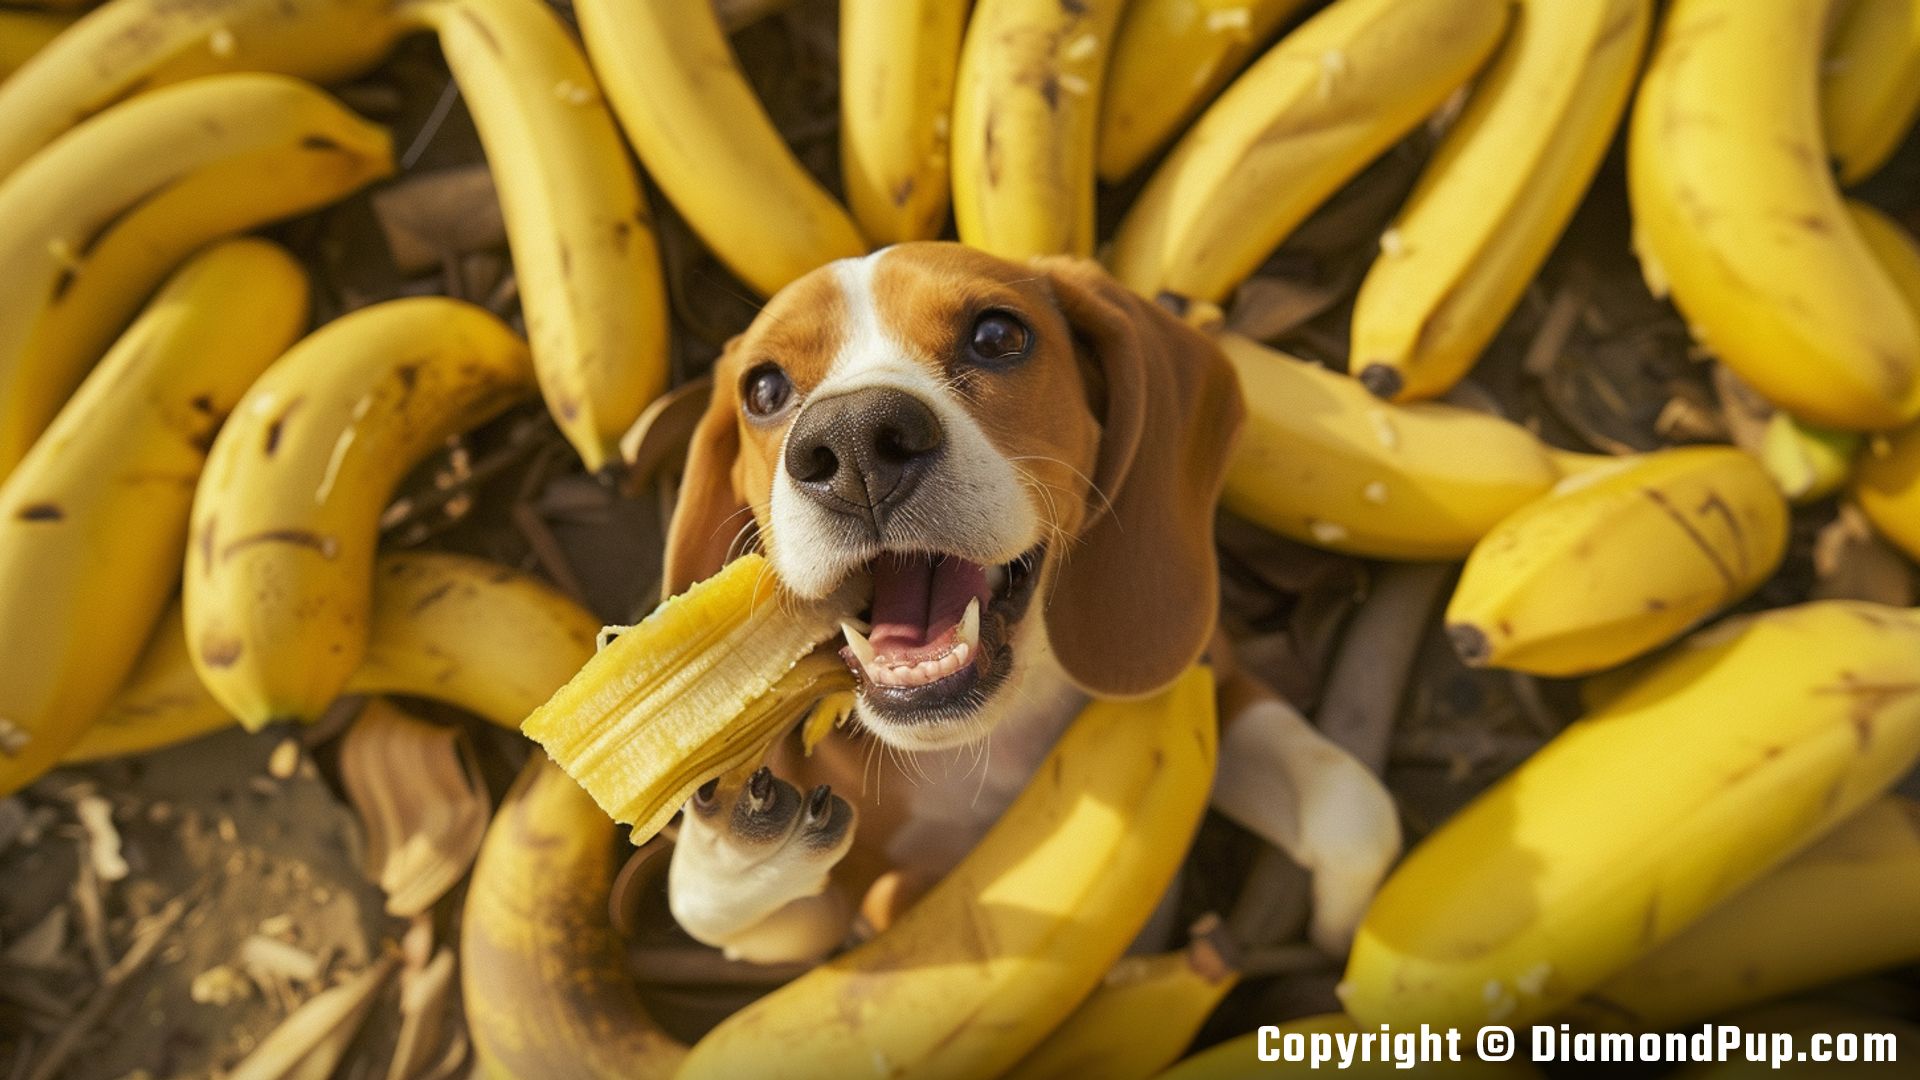 Picture of an Adorable Beagle Snacking on Banana